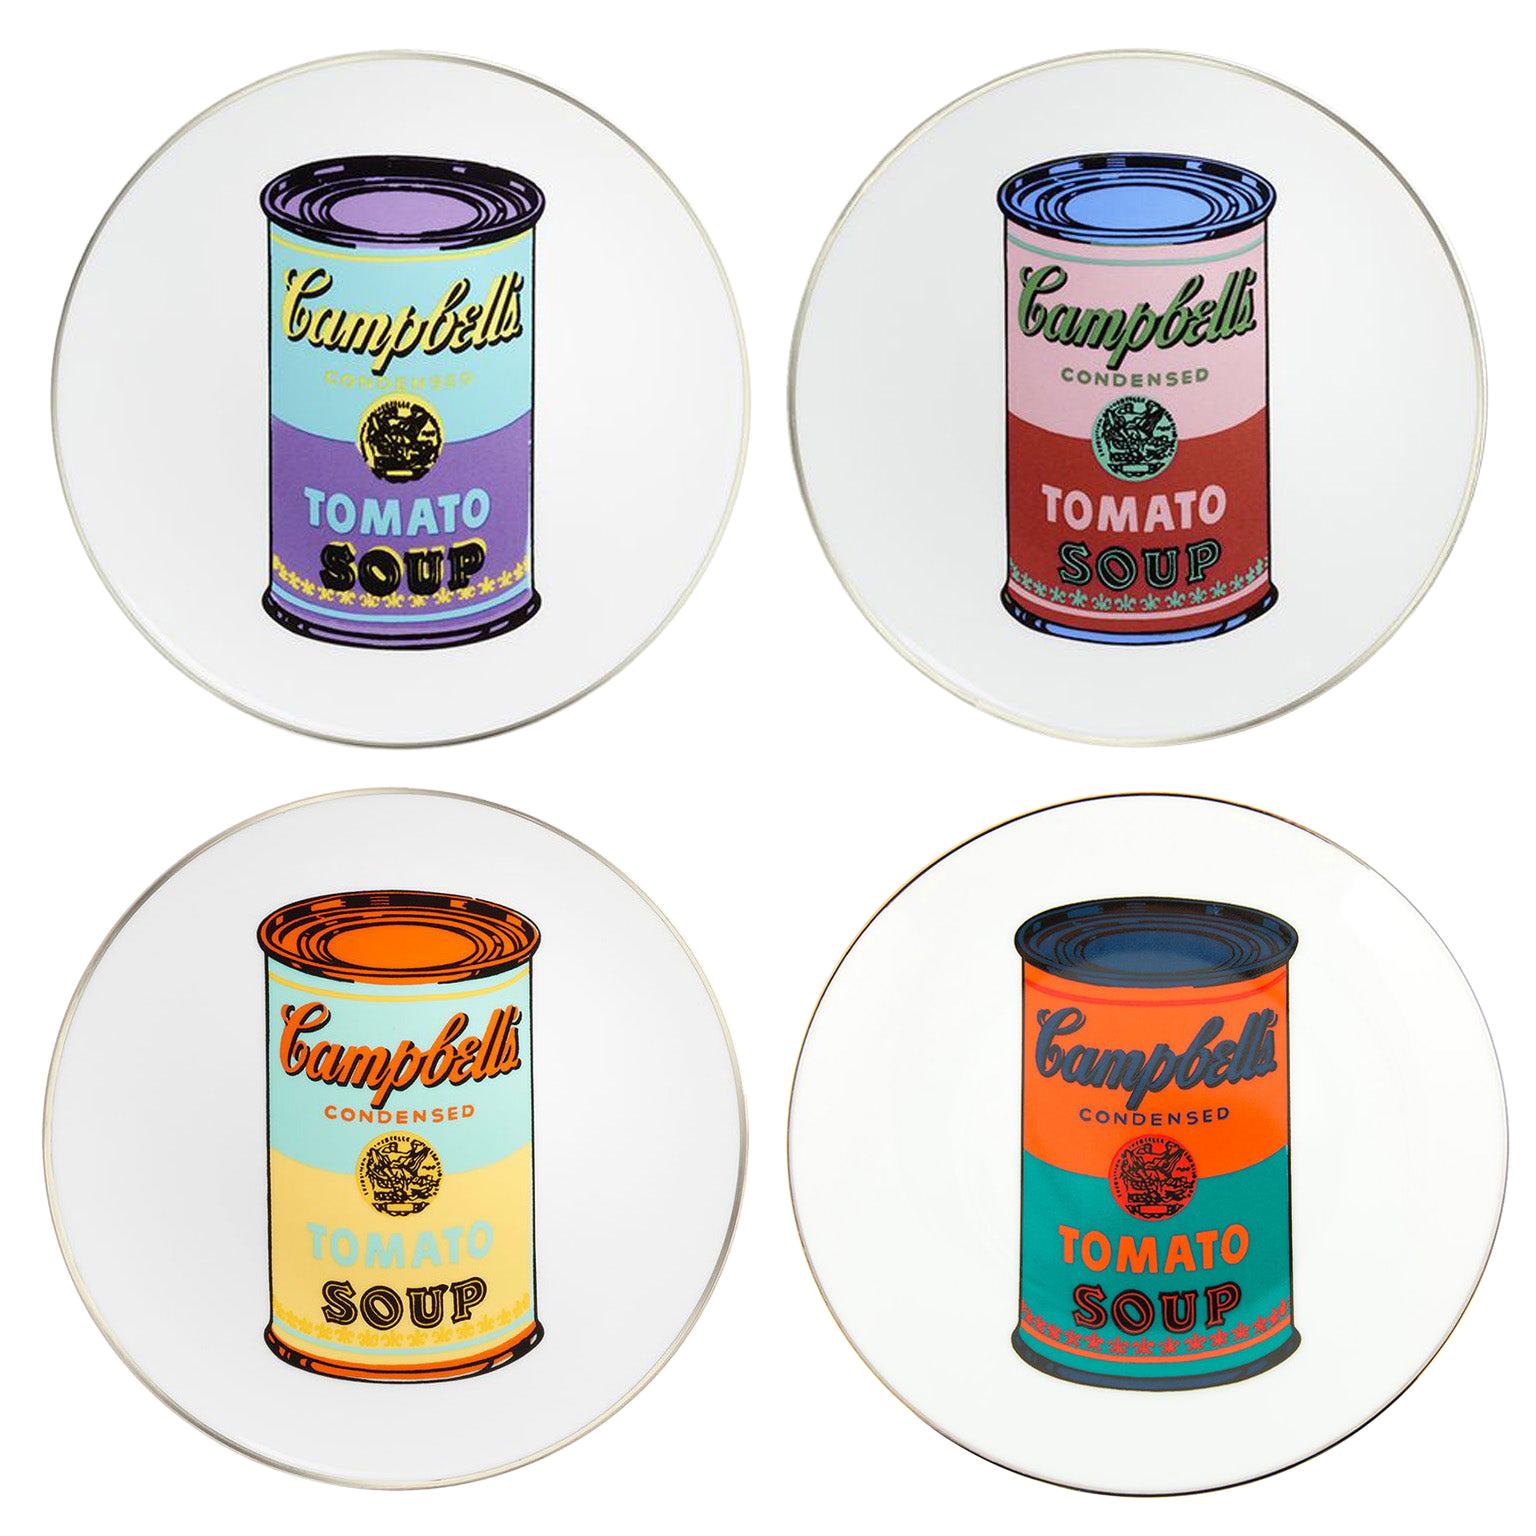 Campbell's Soup Dinner Plates, after Andy Warhol